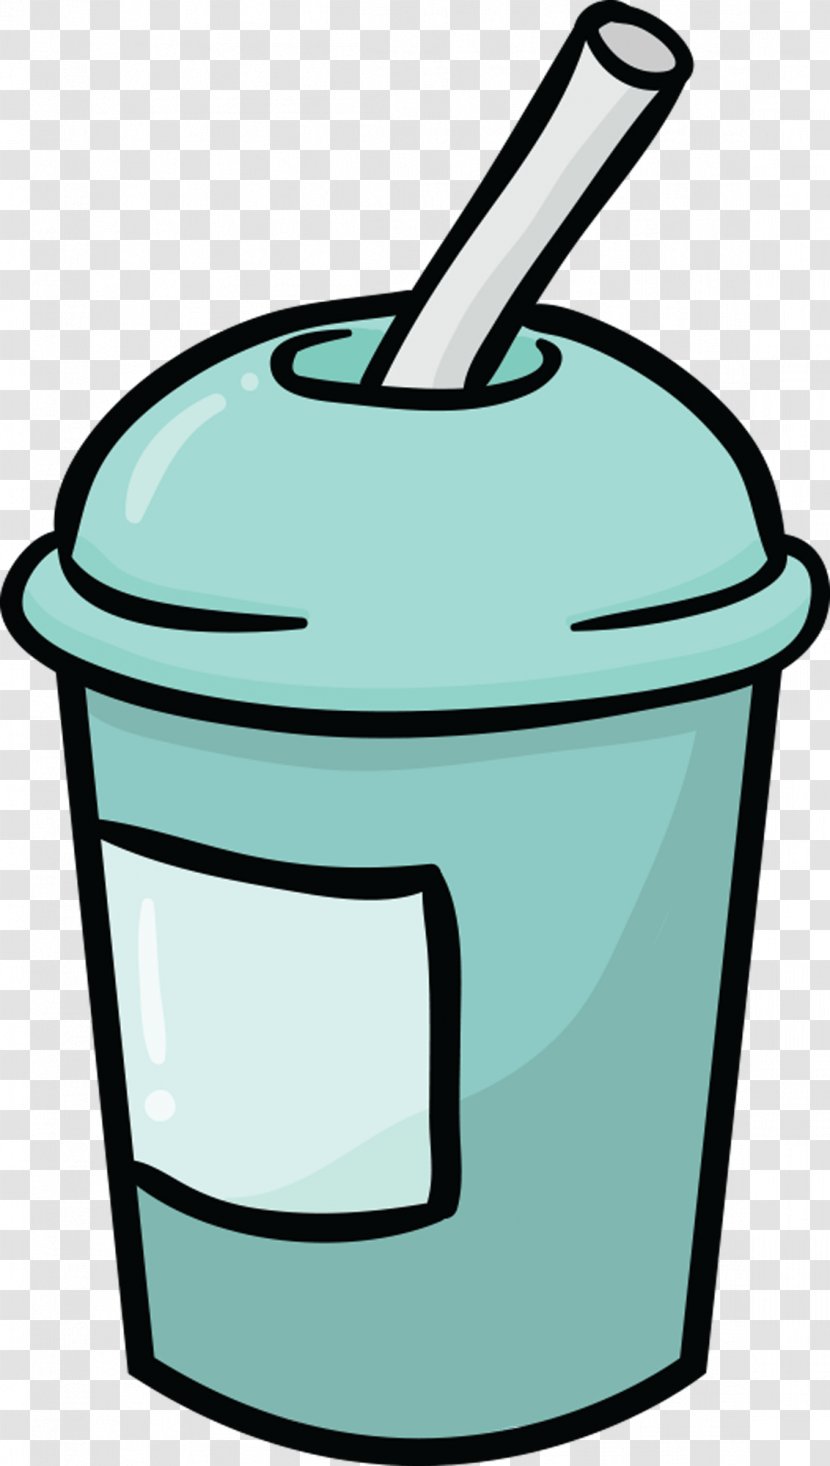 Fizzy Drinks Smoothie Drinking Straw Cup Clip Art - Blue - Milkshake Clipart Transparent PNG